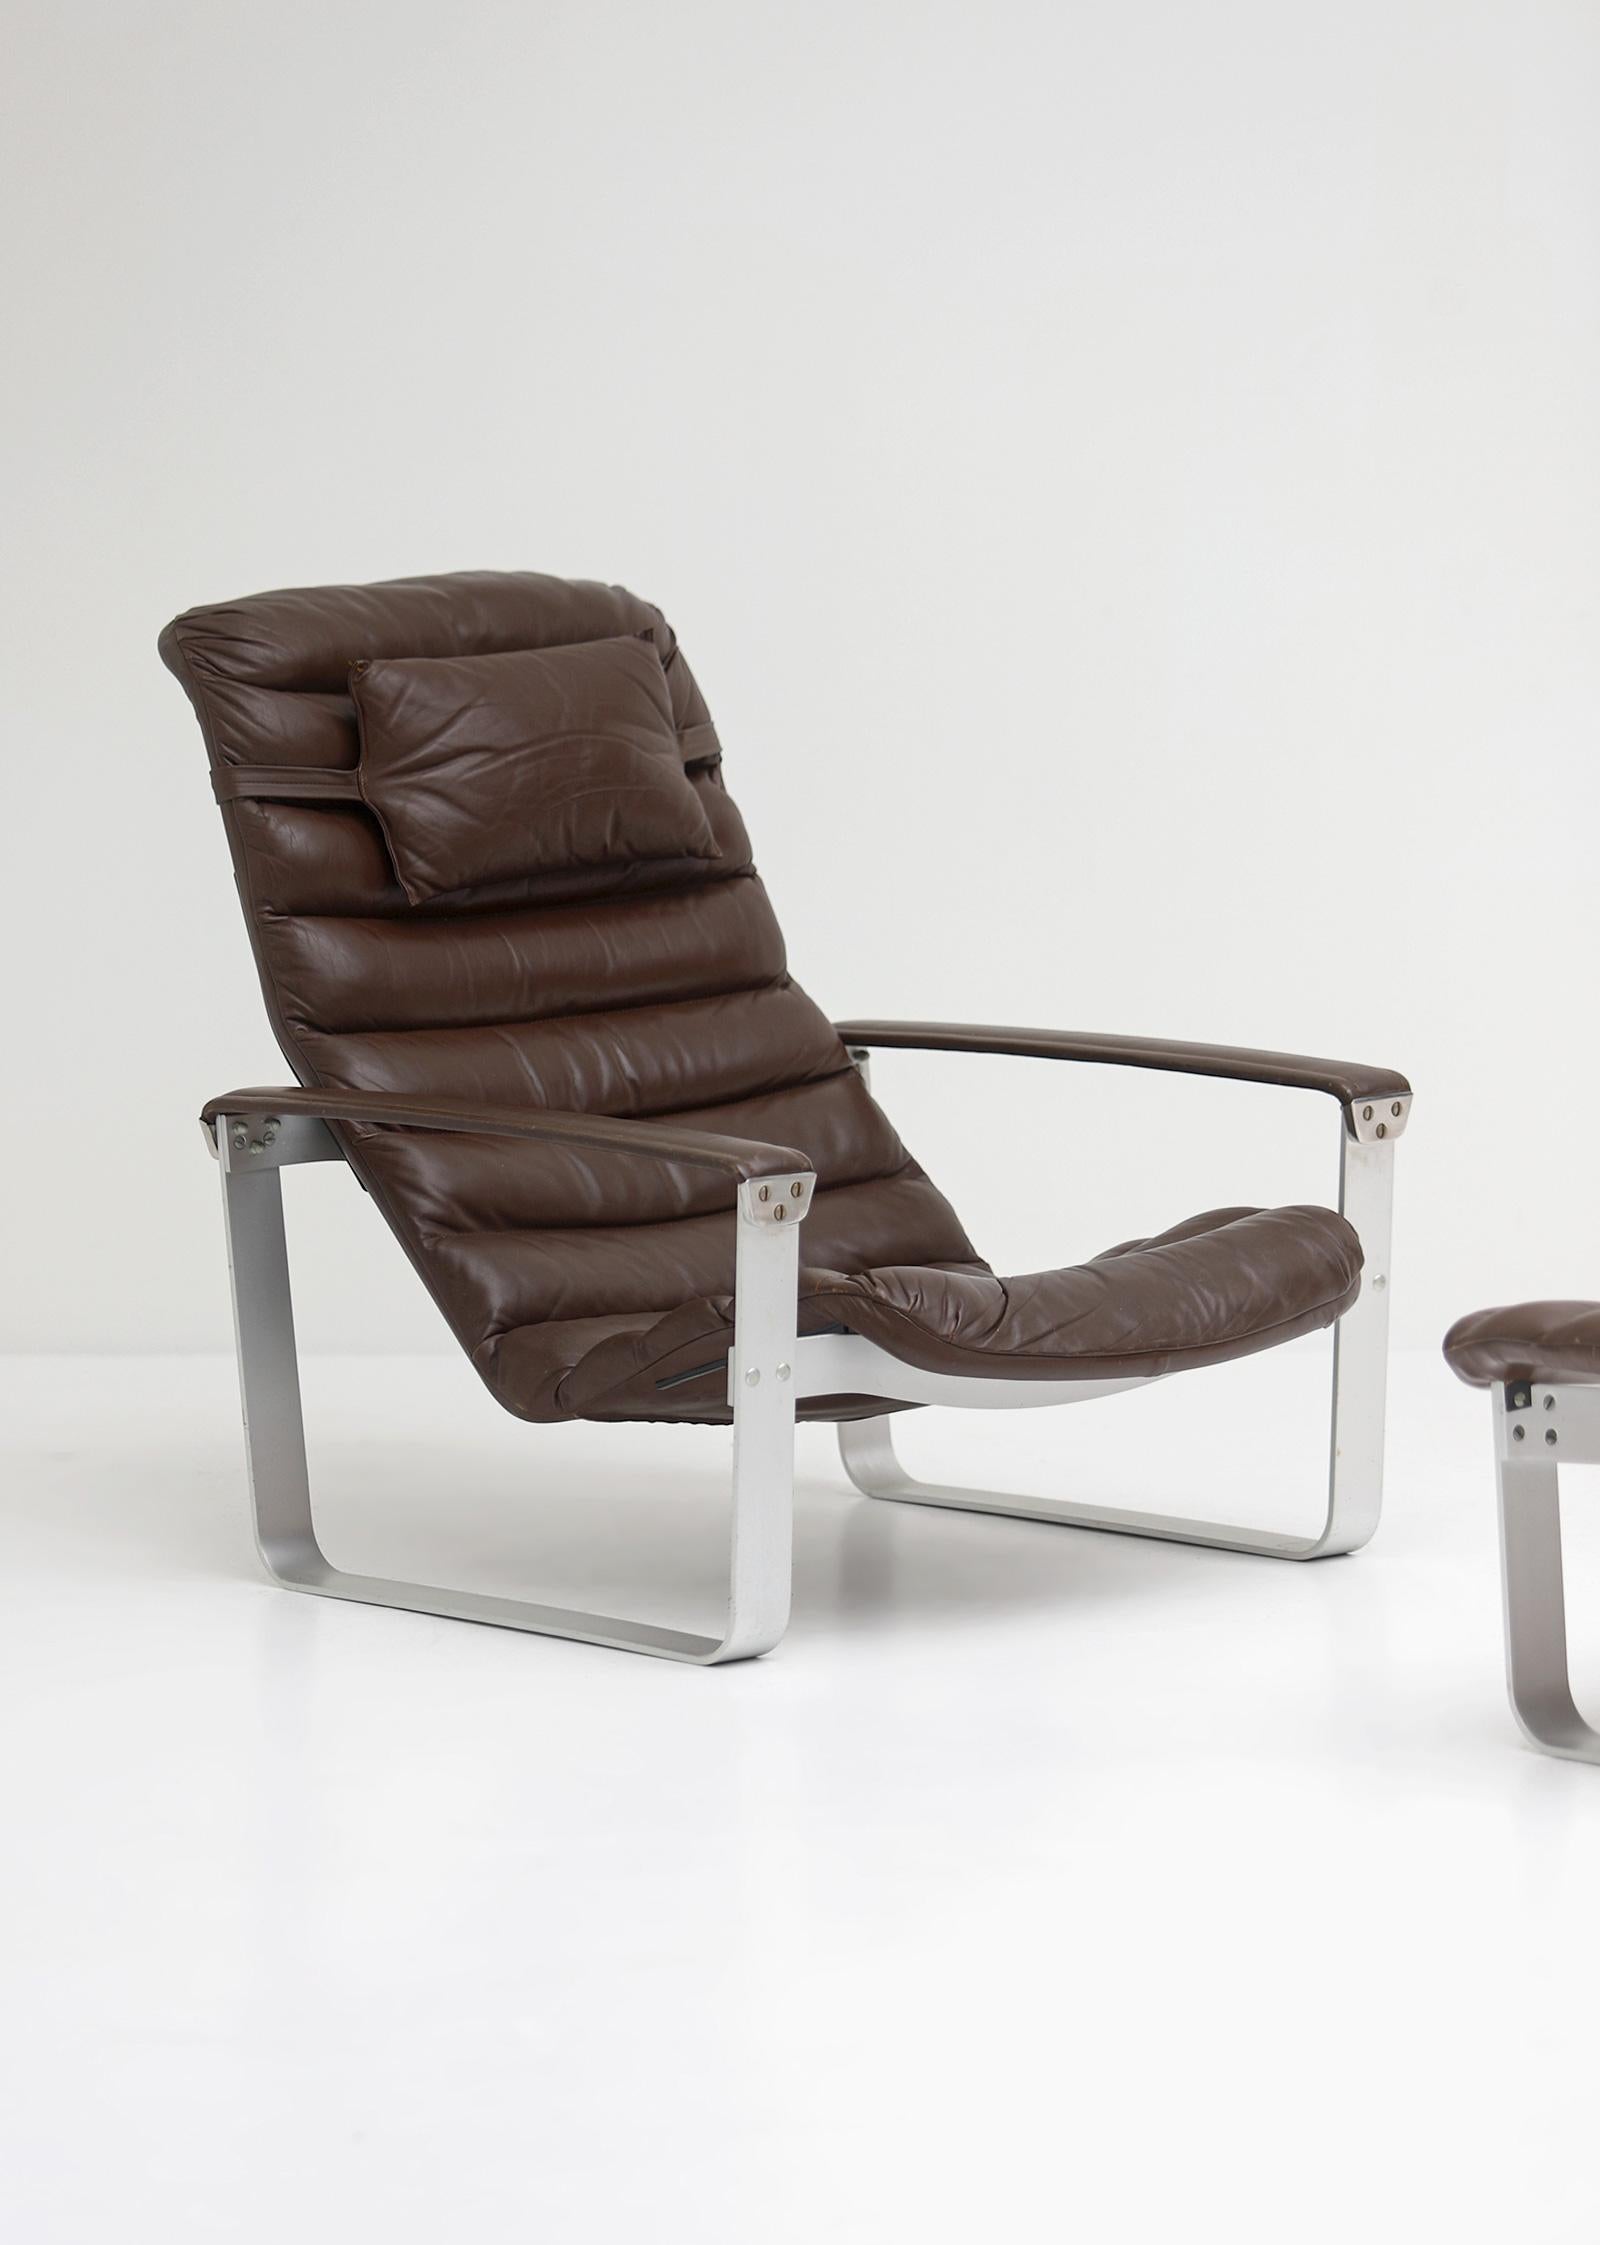 Lounge chair with Ottoman designed by Ilmari Lappalainen For Asko 1960s. Both items have an aluminum base and are upholstered in a chocolate brown leather. The seating is adjustable in three stages and very comfortable. The set comes from the first